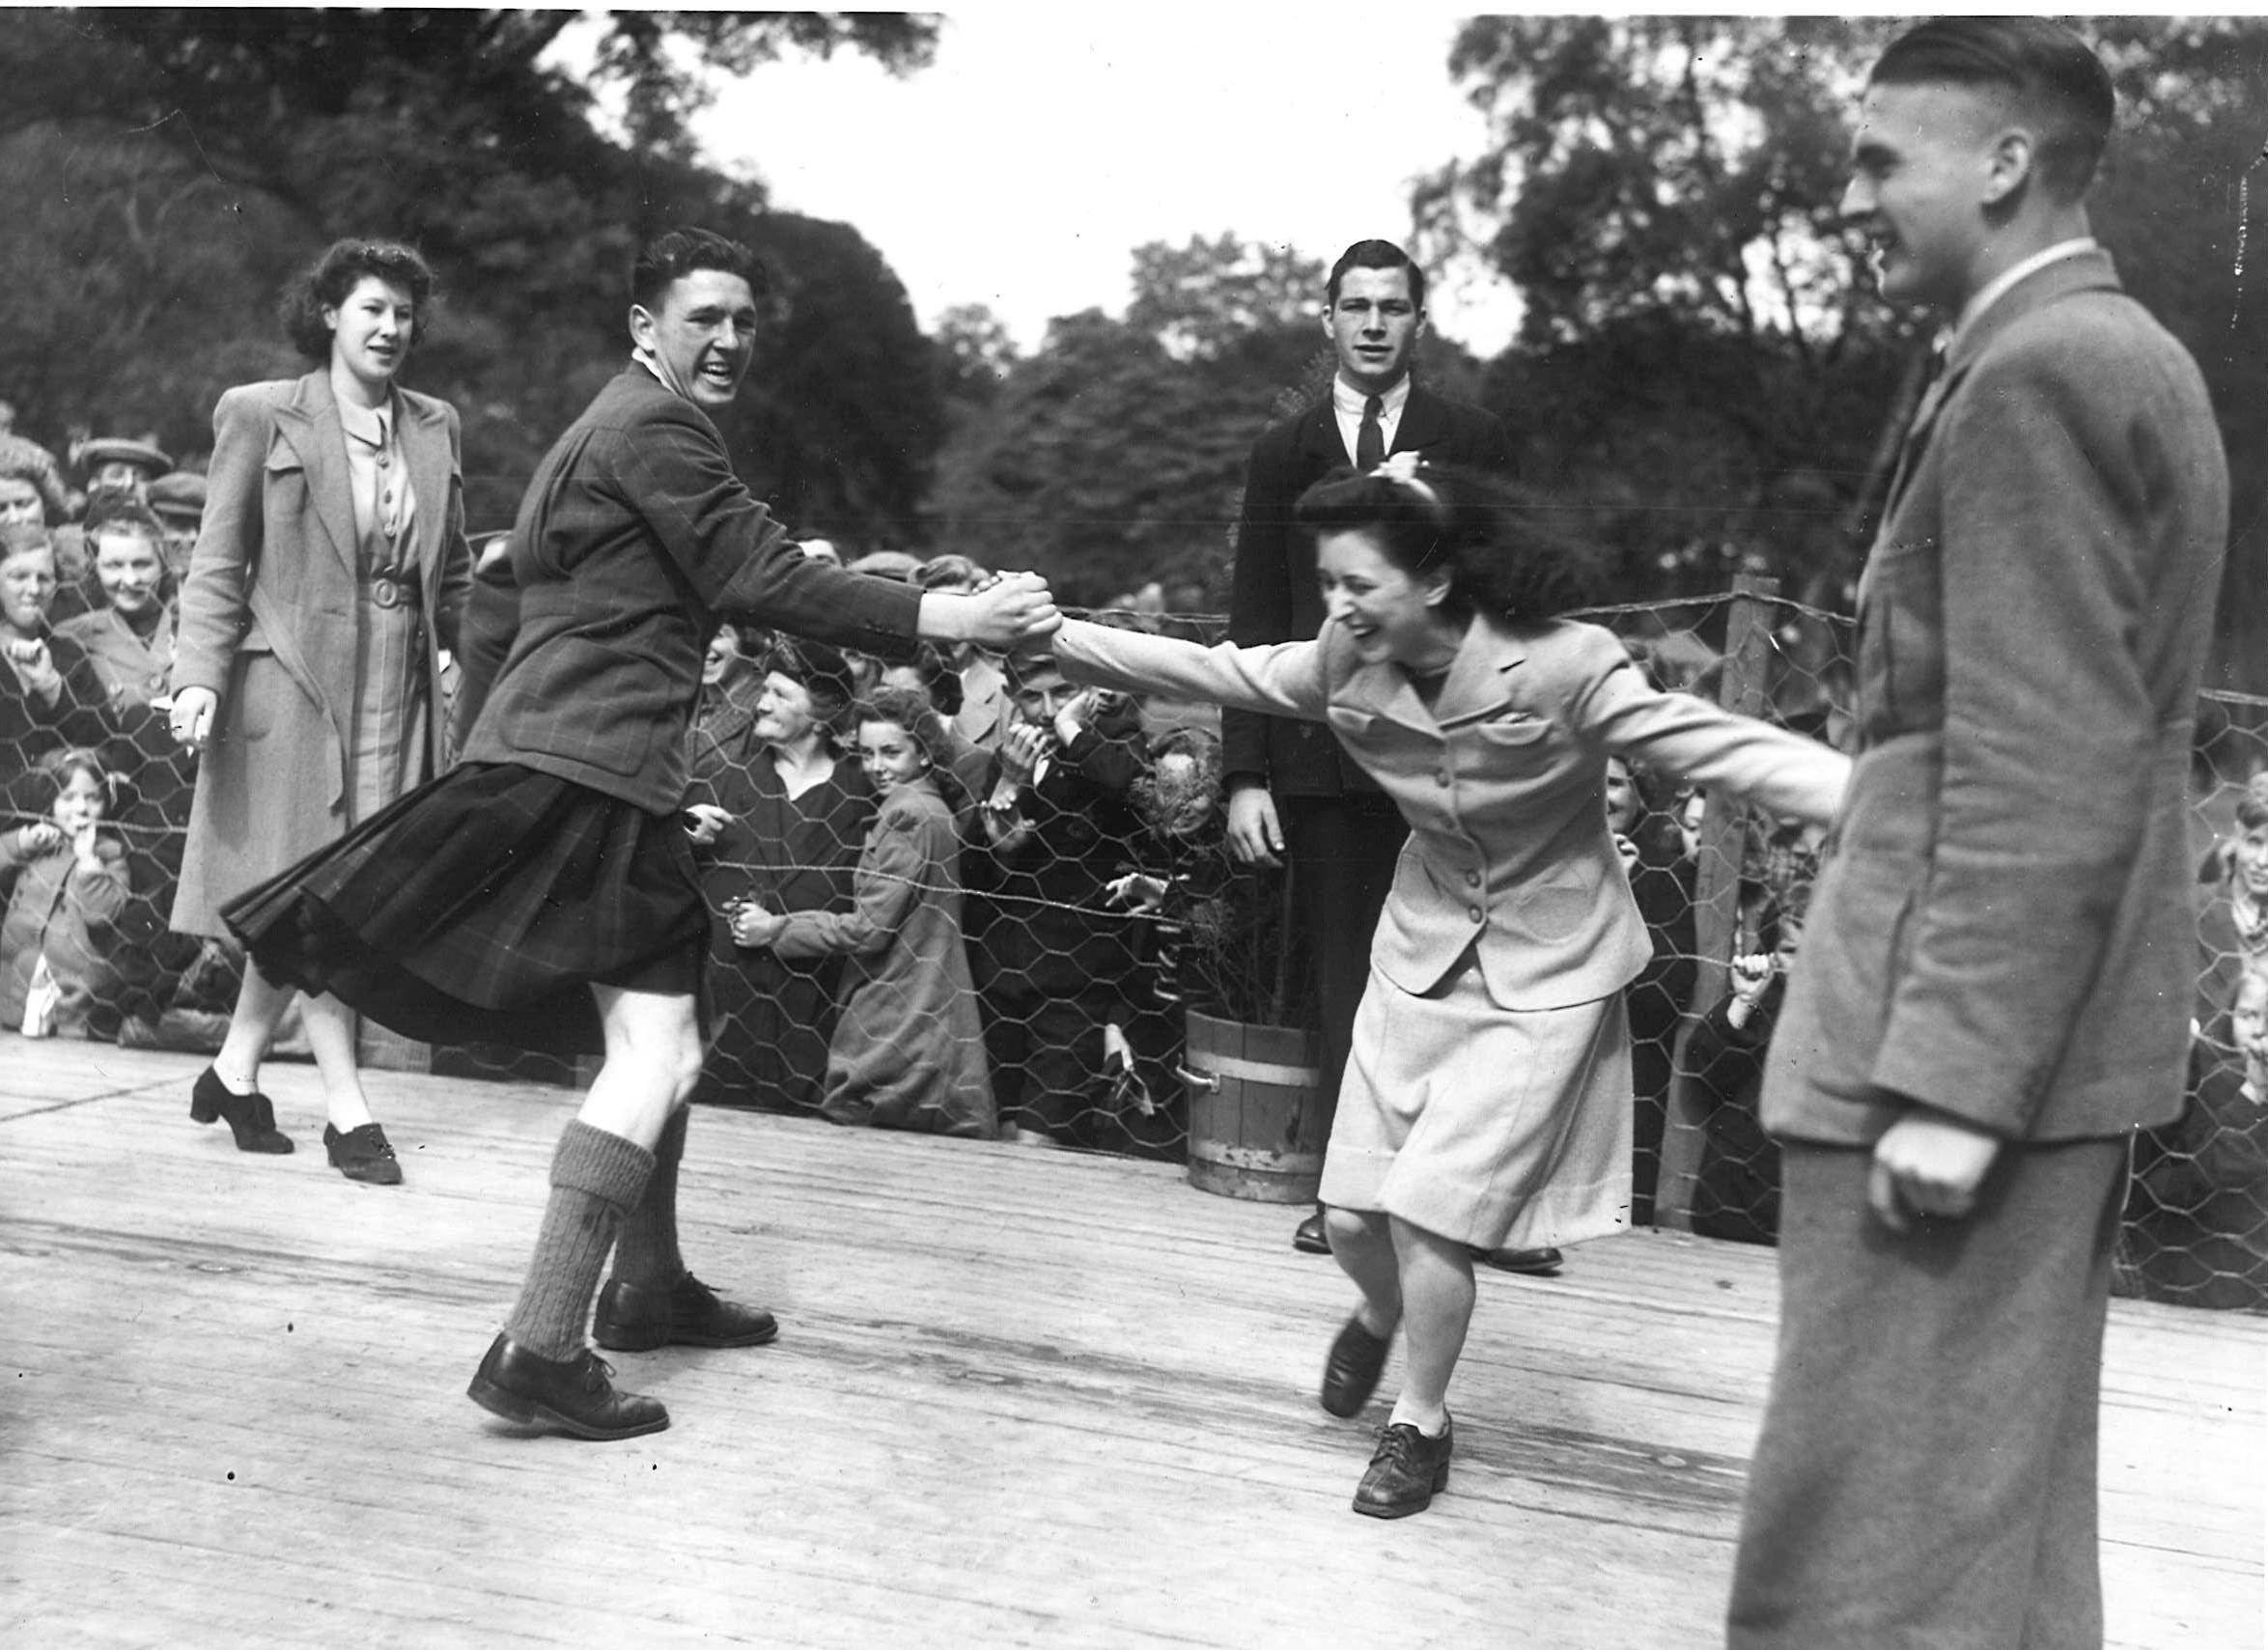 Stay at Home Holidays. Events were staged to help distract war woes. Fun during the eightsome reel at Hazlehead park summer 1942